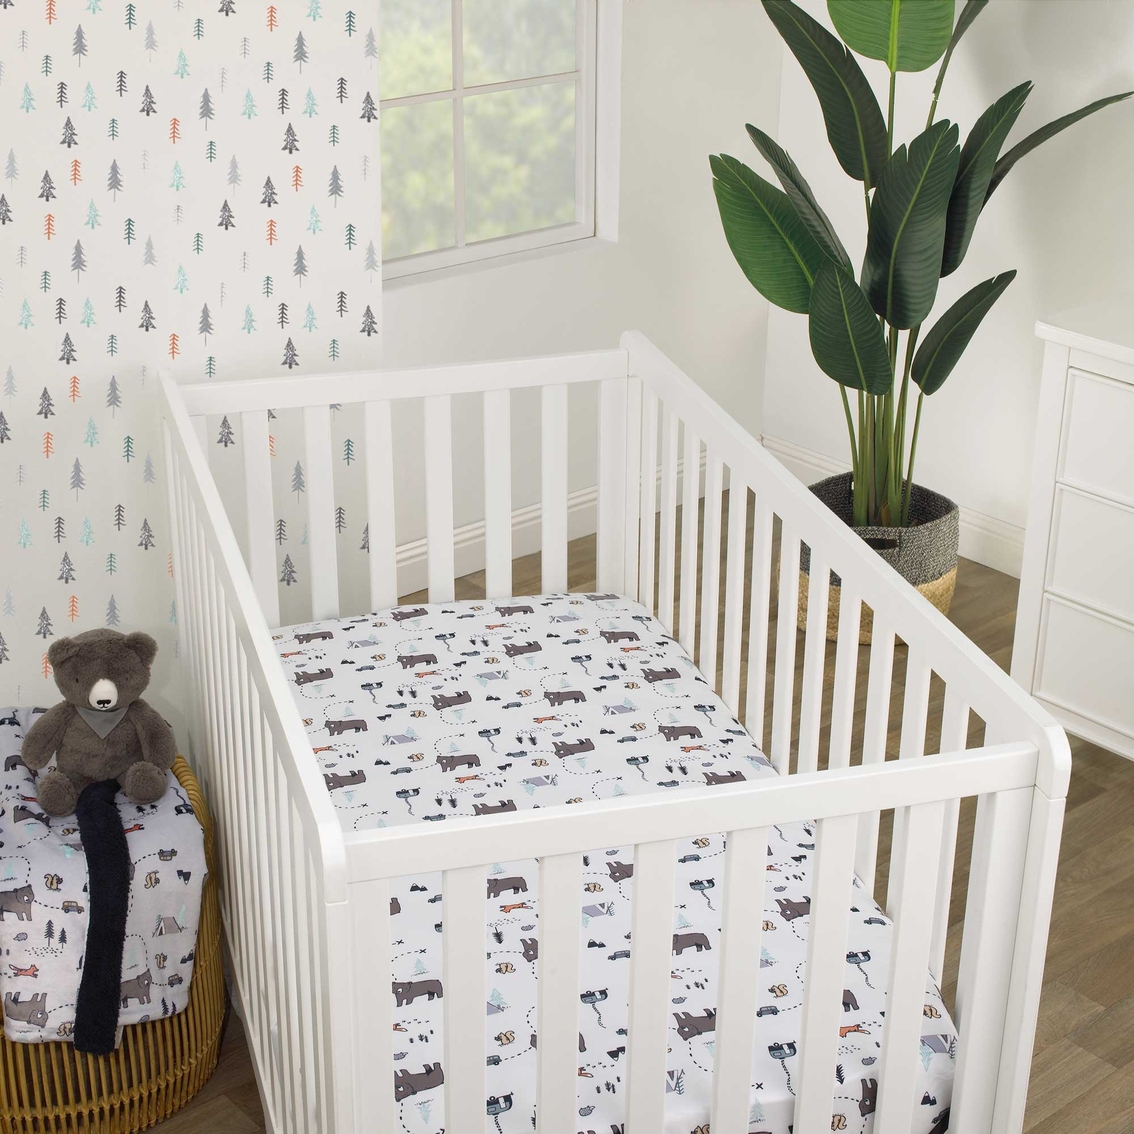 Carter's Woodland Friends Fitted Crib Sheet - Image 4 of 5